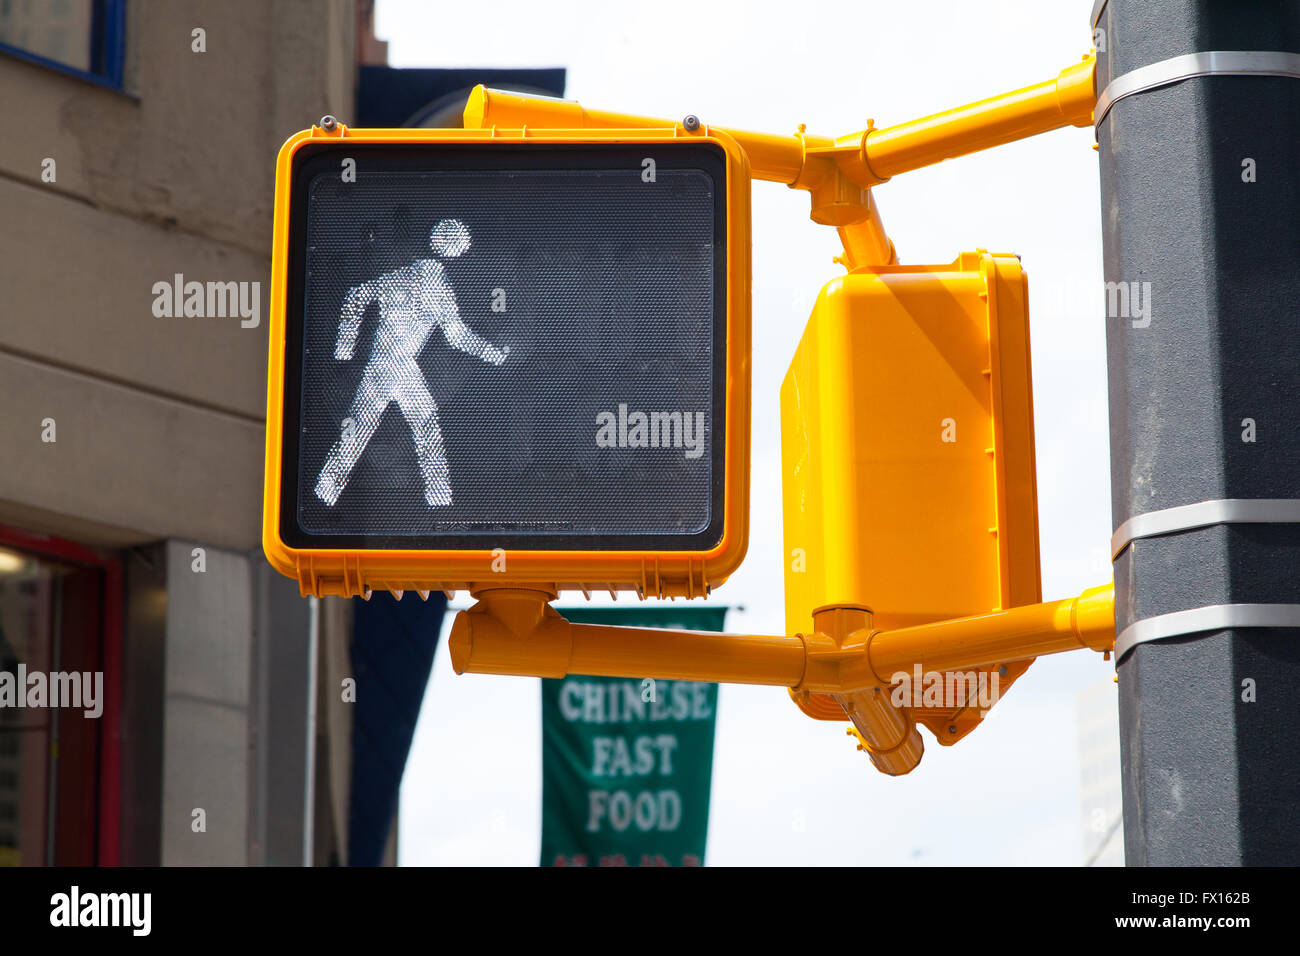 66,543 Pedestrian Crossing Sign Images, Stock Photos, 3D objects